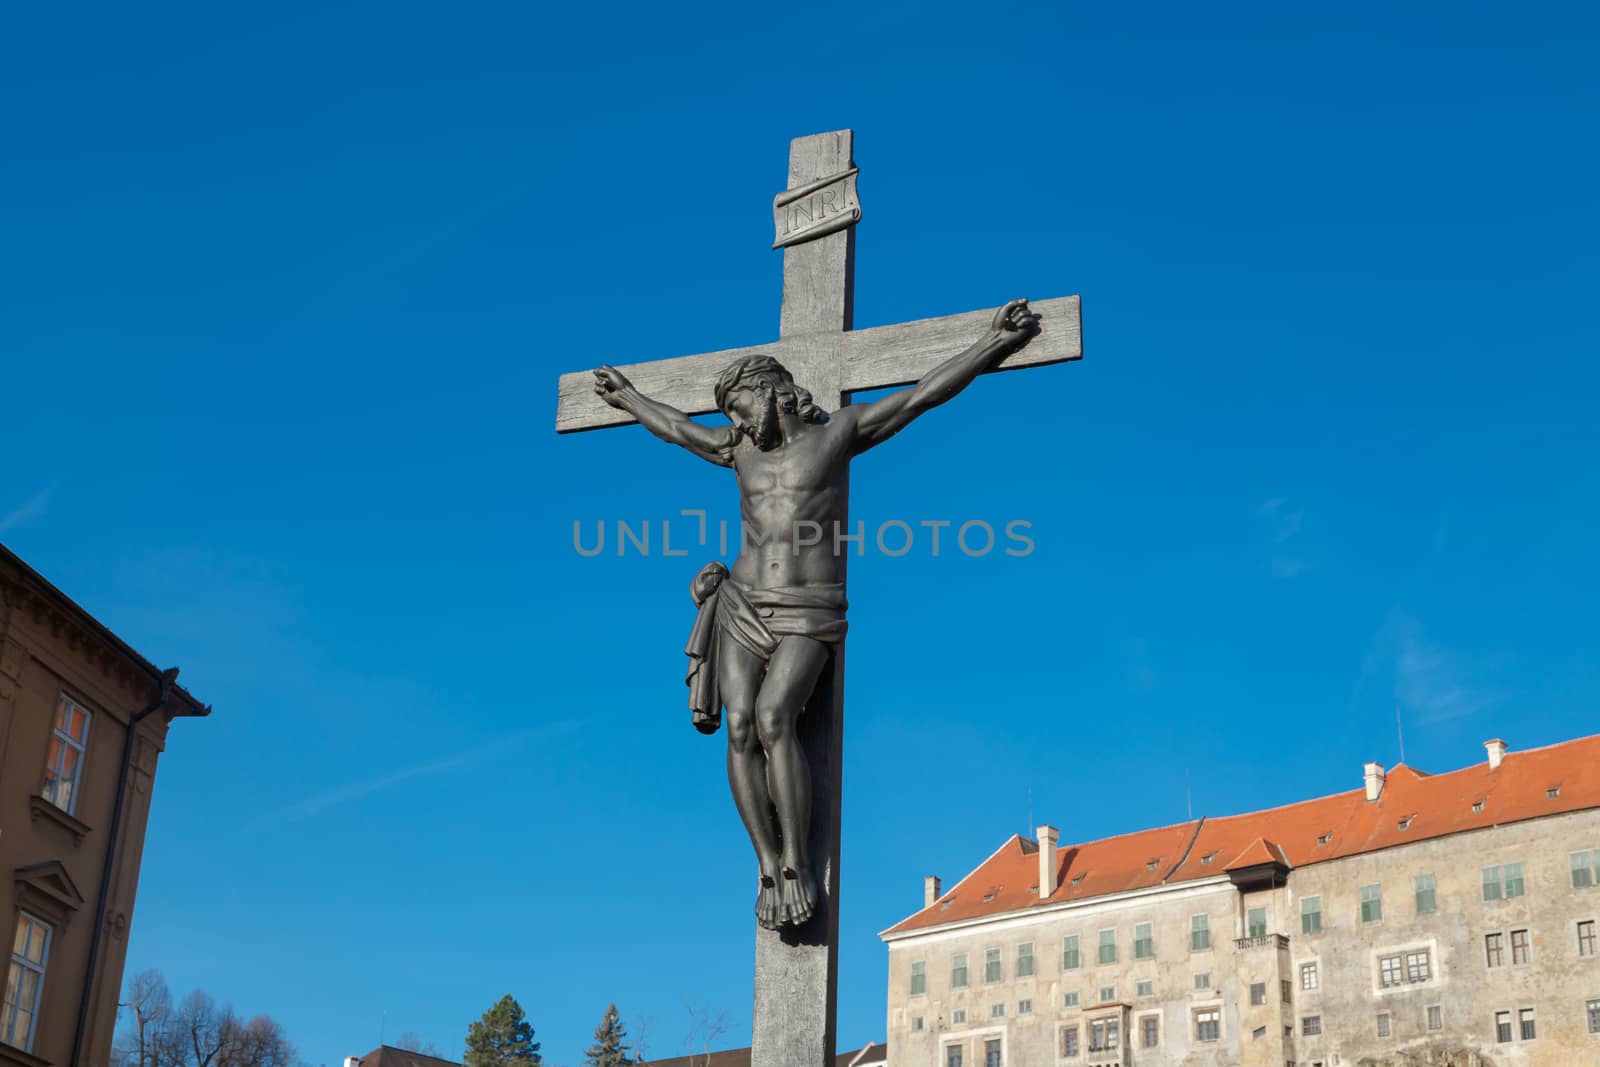 Close up detailed view of a crucifixe Jesus sculpture, on bright blue sky background.